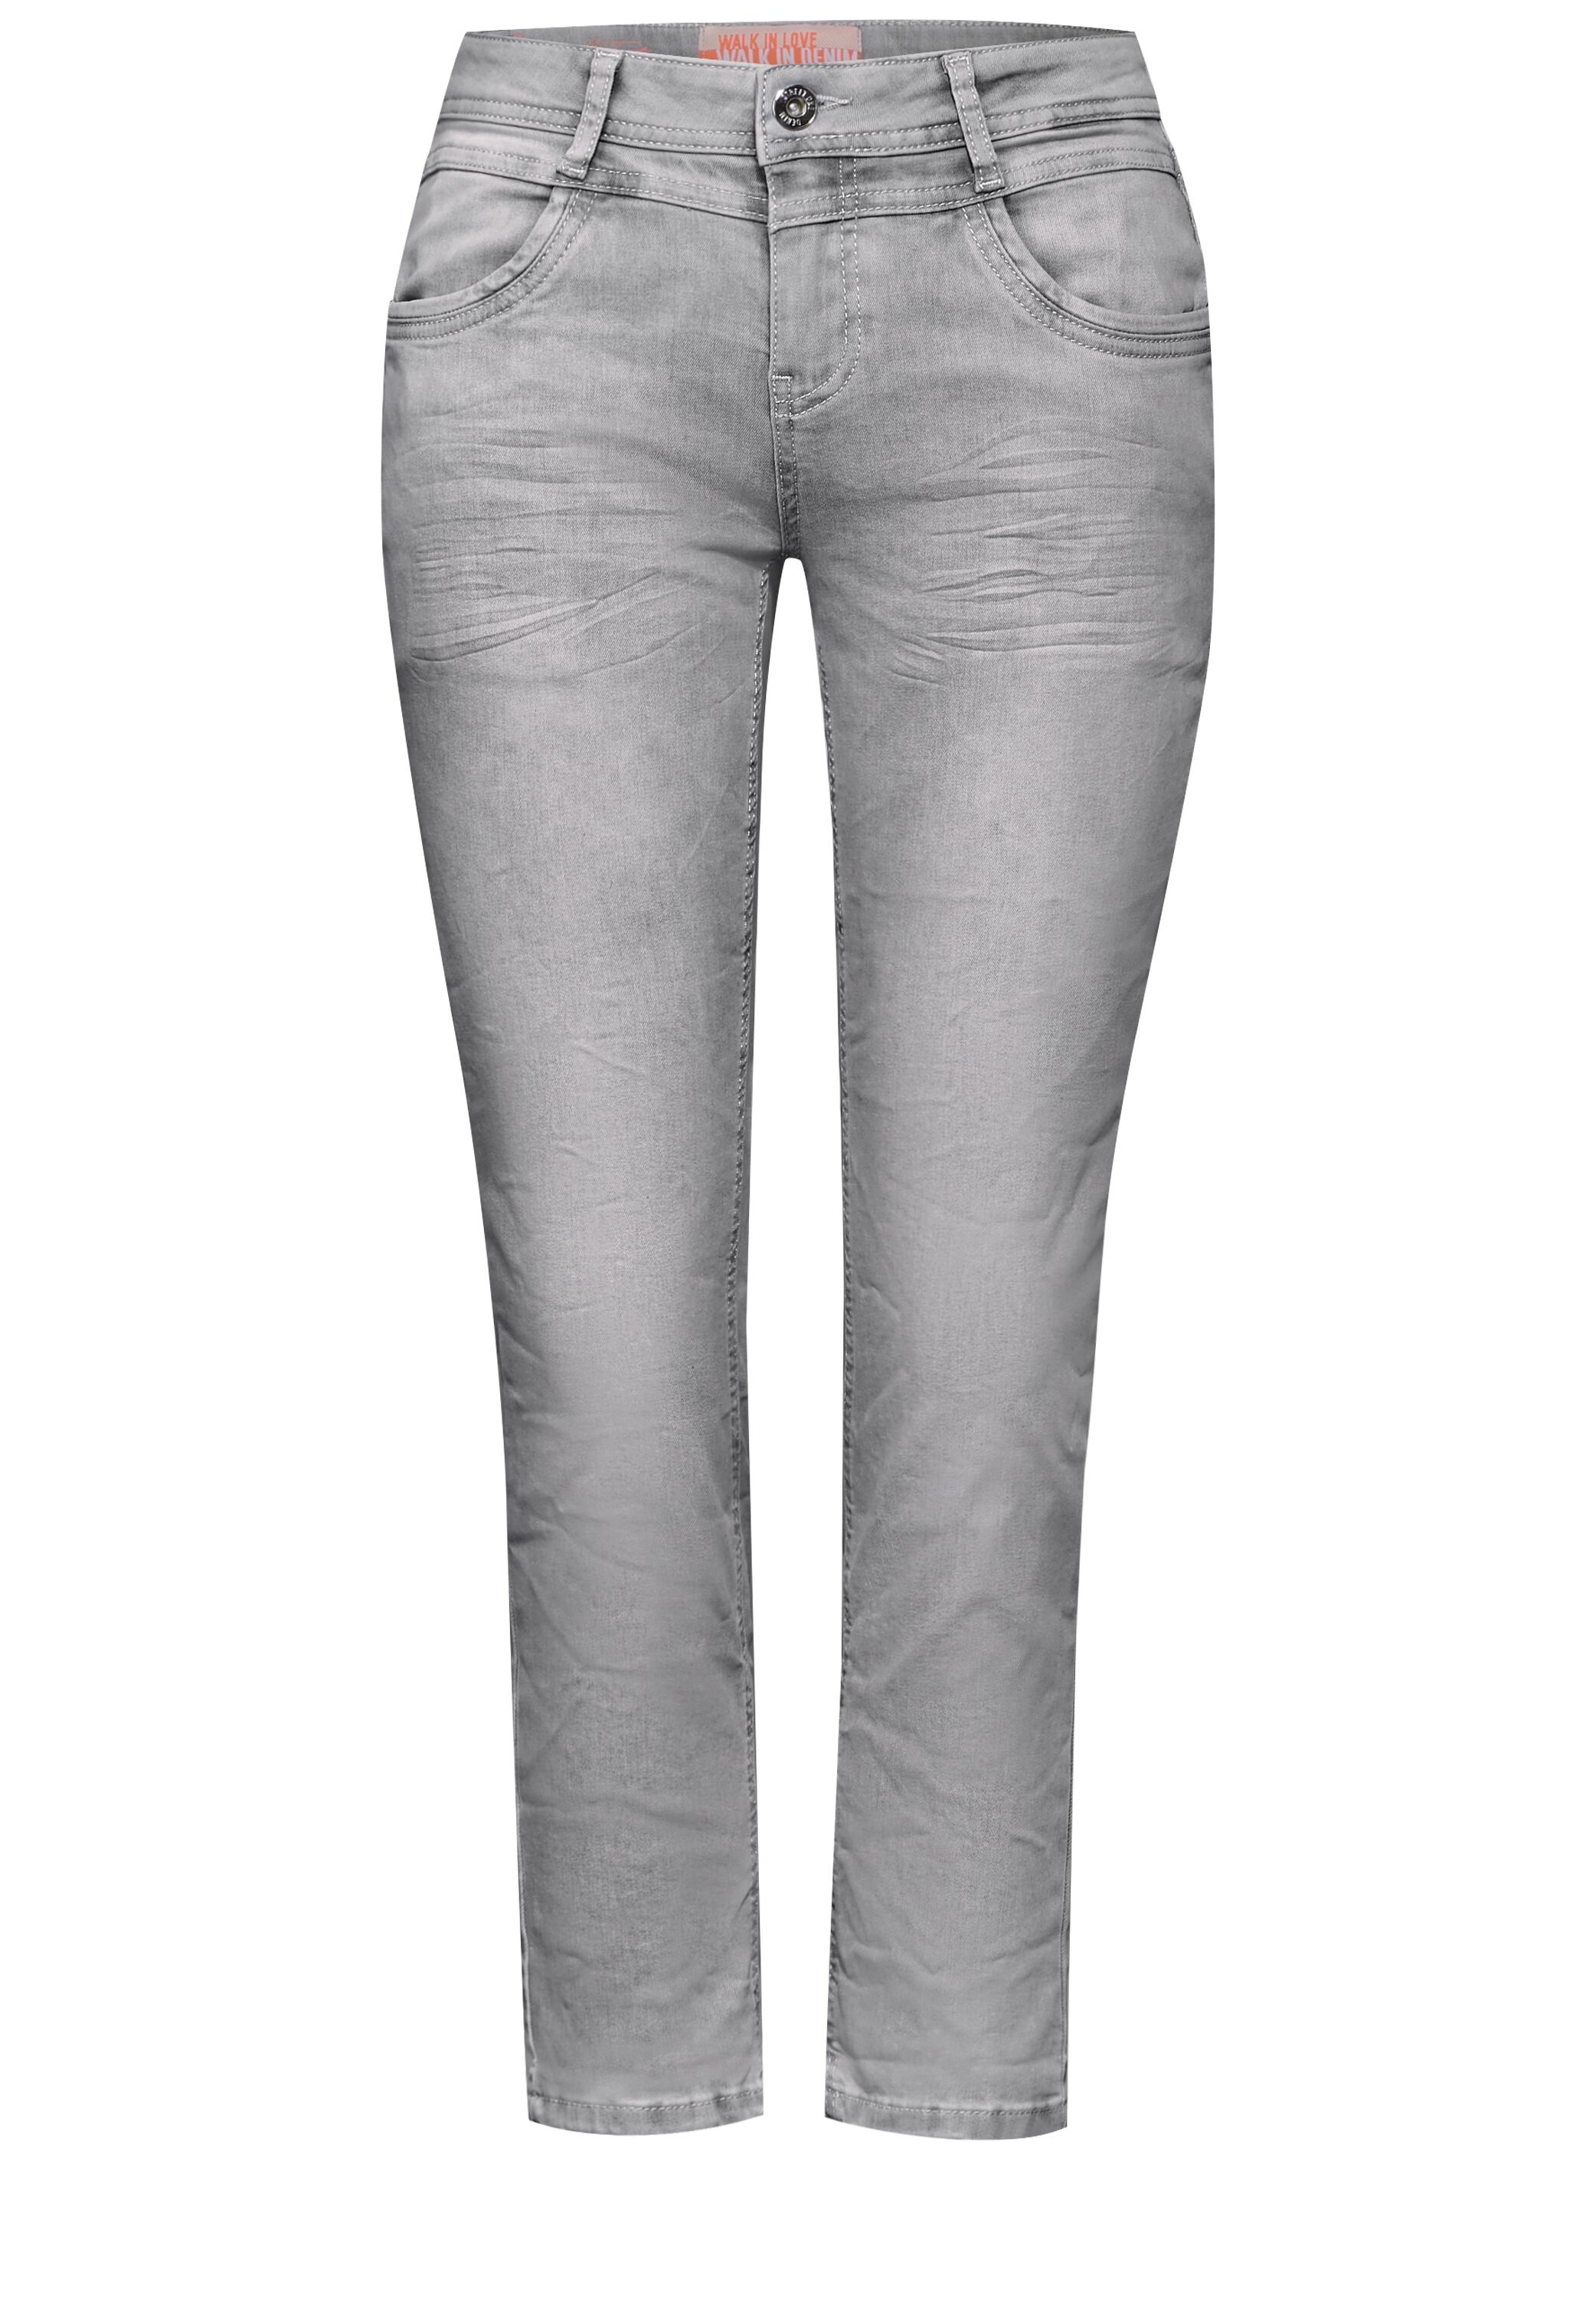 STREET ONE Skinny-fit-Jeans, 4-Pocket Style